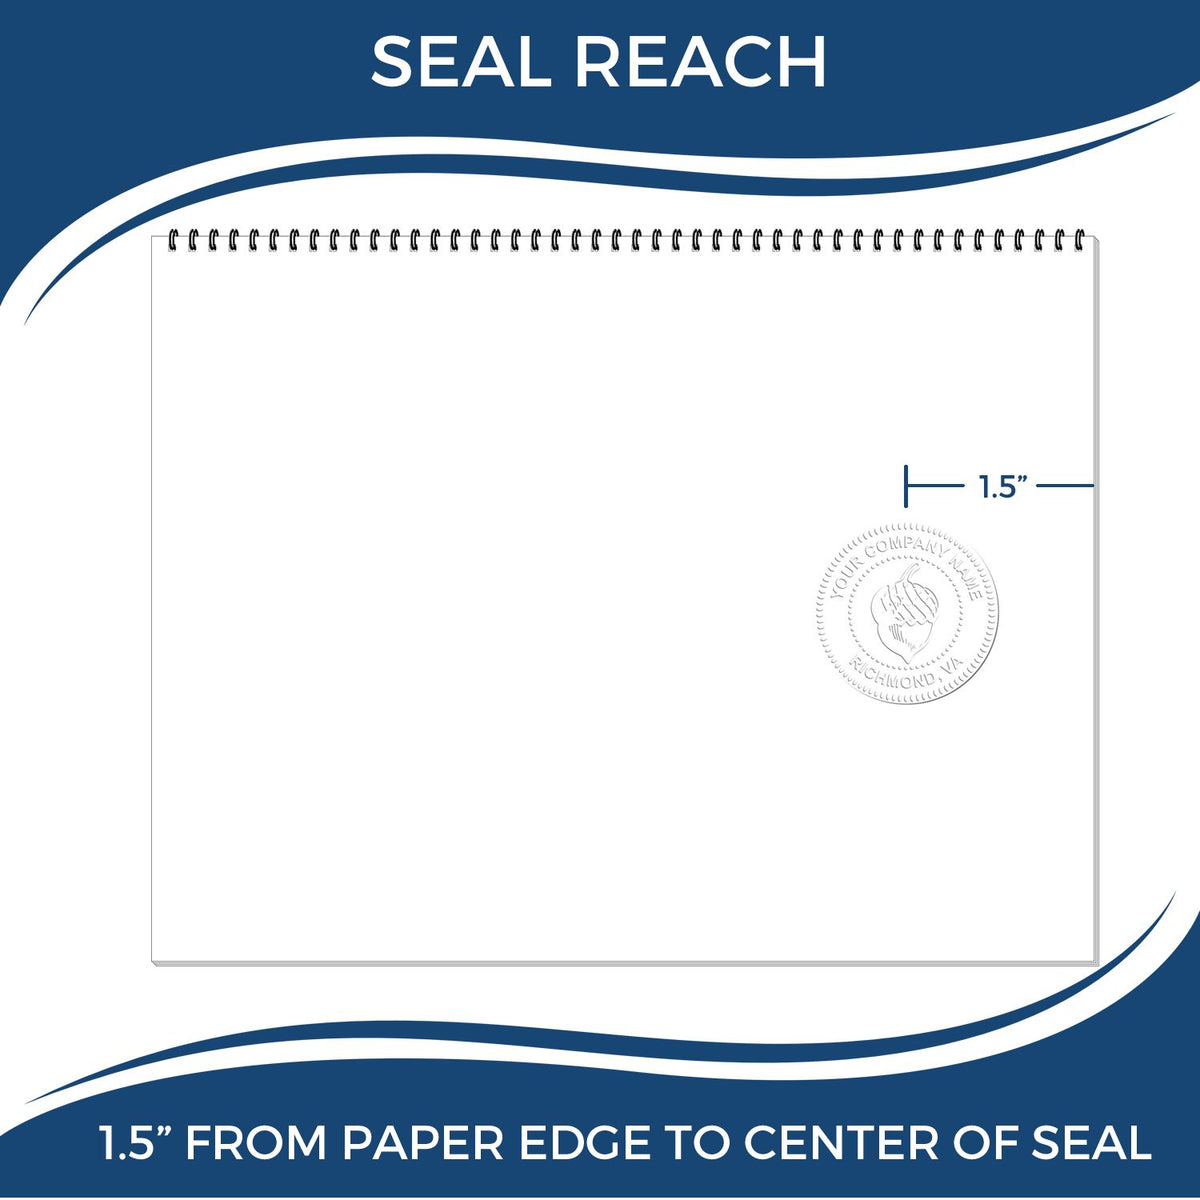 An infographic showing the seal reach which is represented by a ruler and a miniature seal image of the Nevada Desk Surveyor Seal Embosser